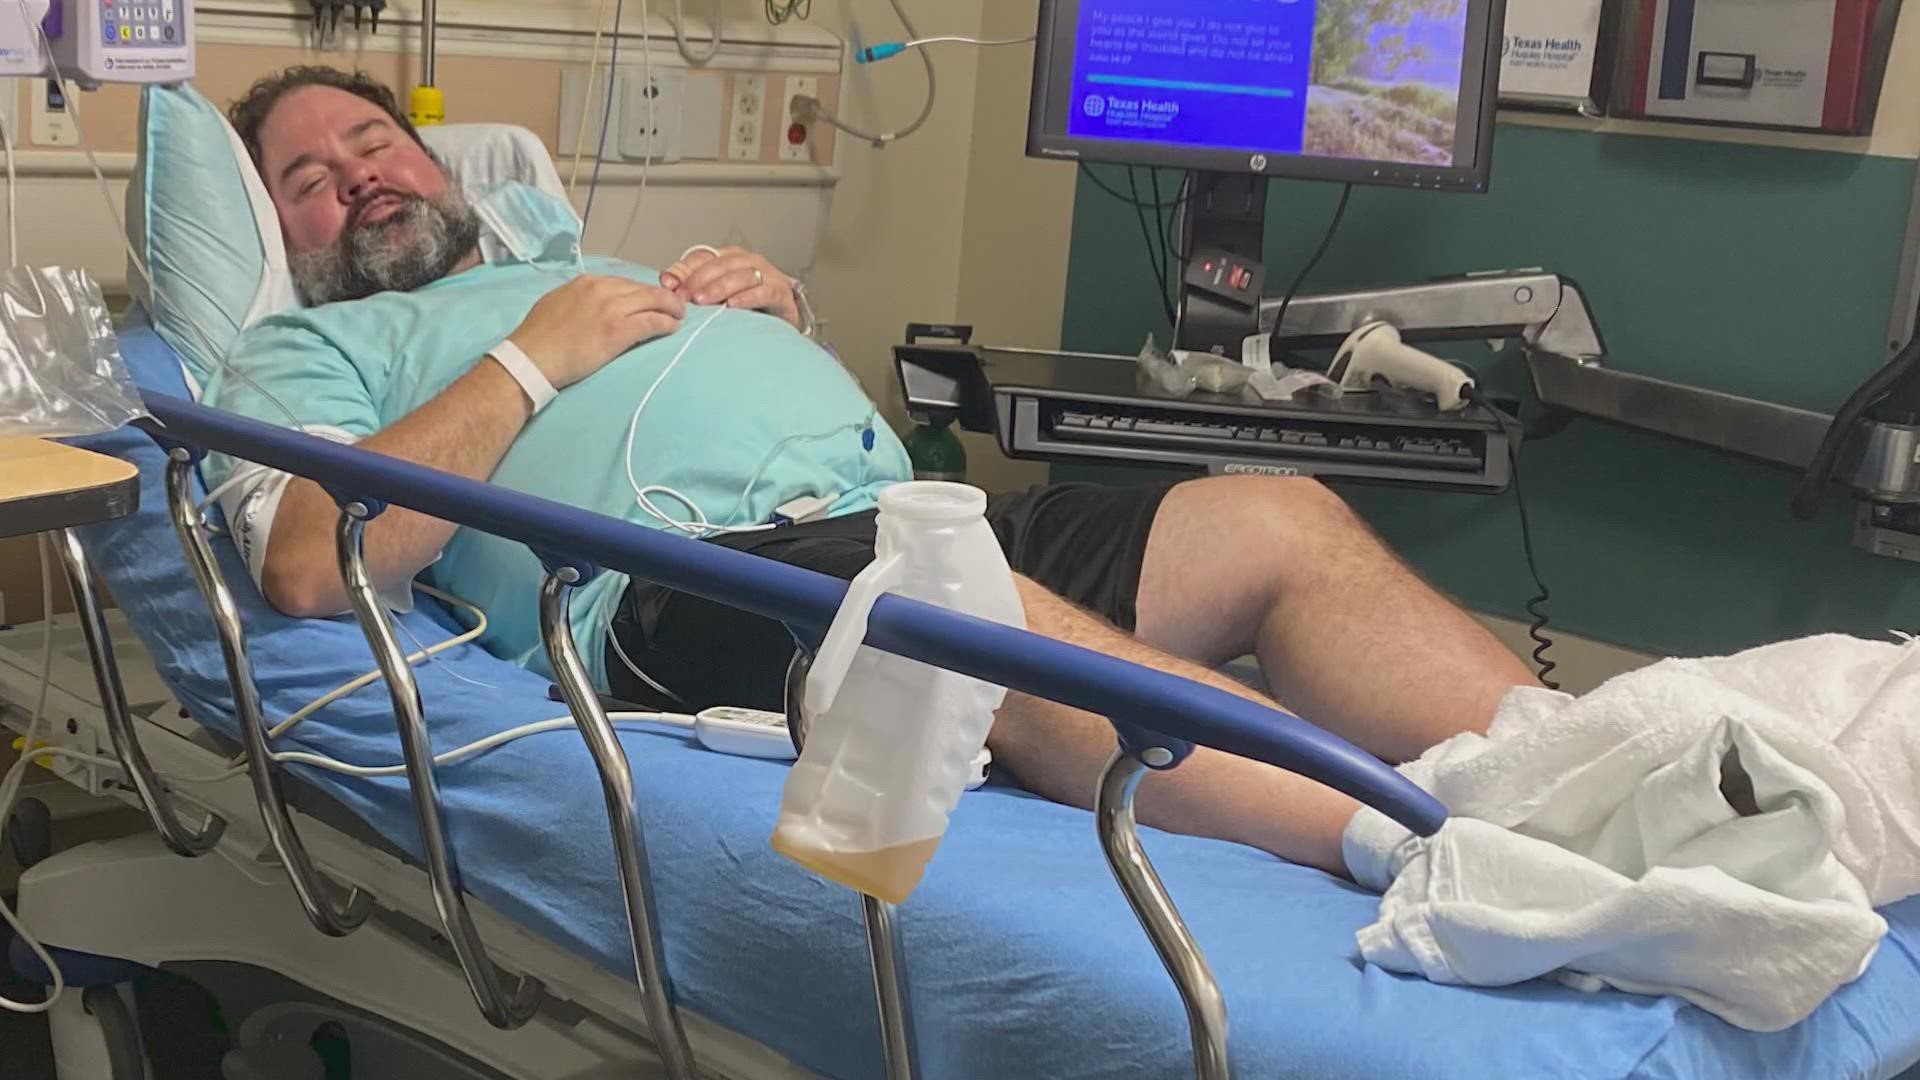 He's still struggling. But he's accomplishing more and more with the help of a motor-powered bionic knee.